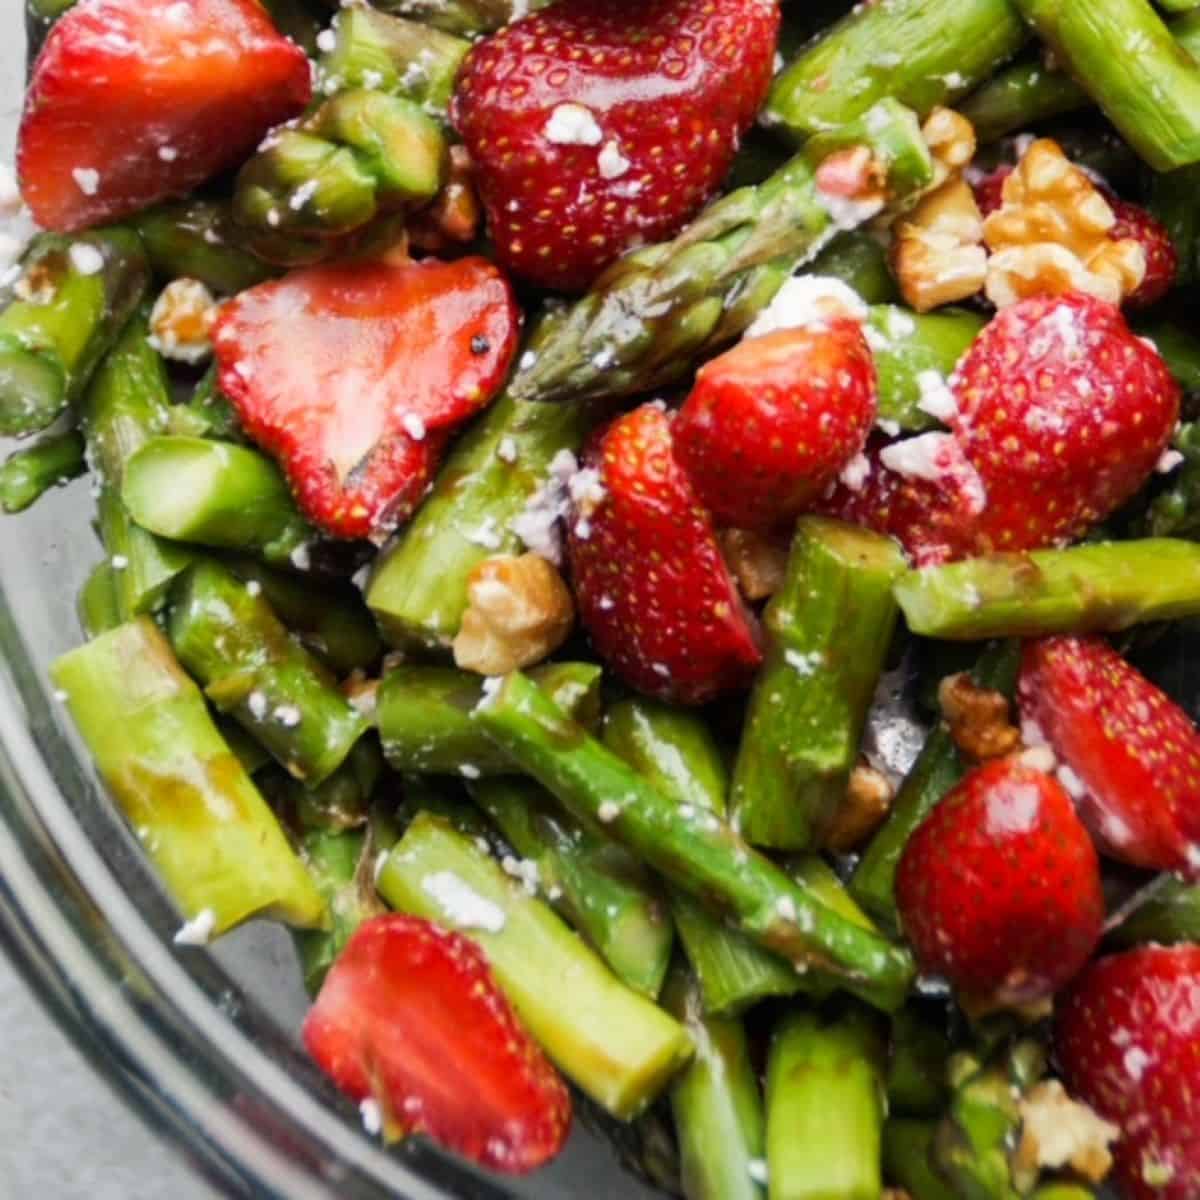 Cold asparagus salad with strawberries in a glass bowl.